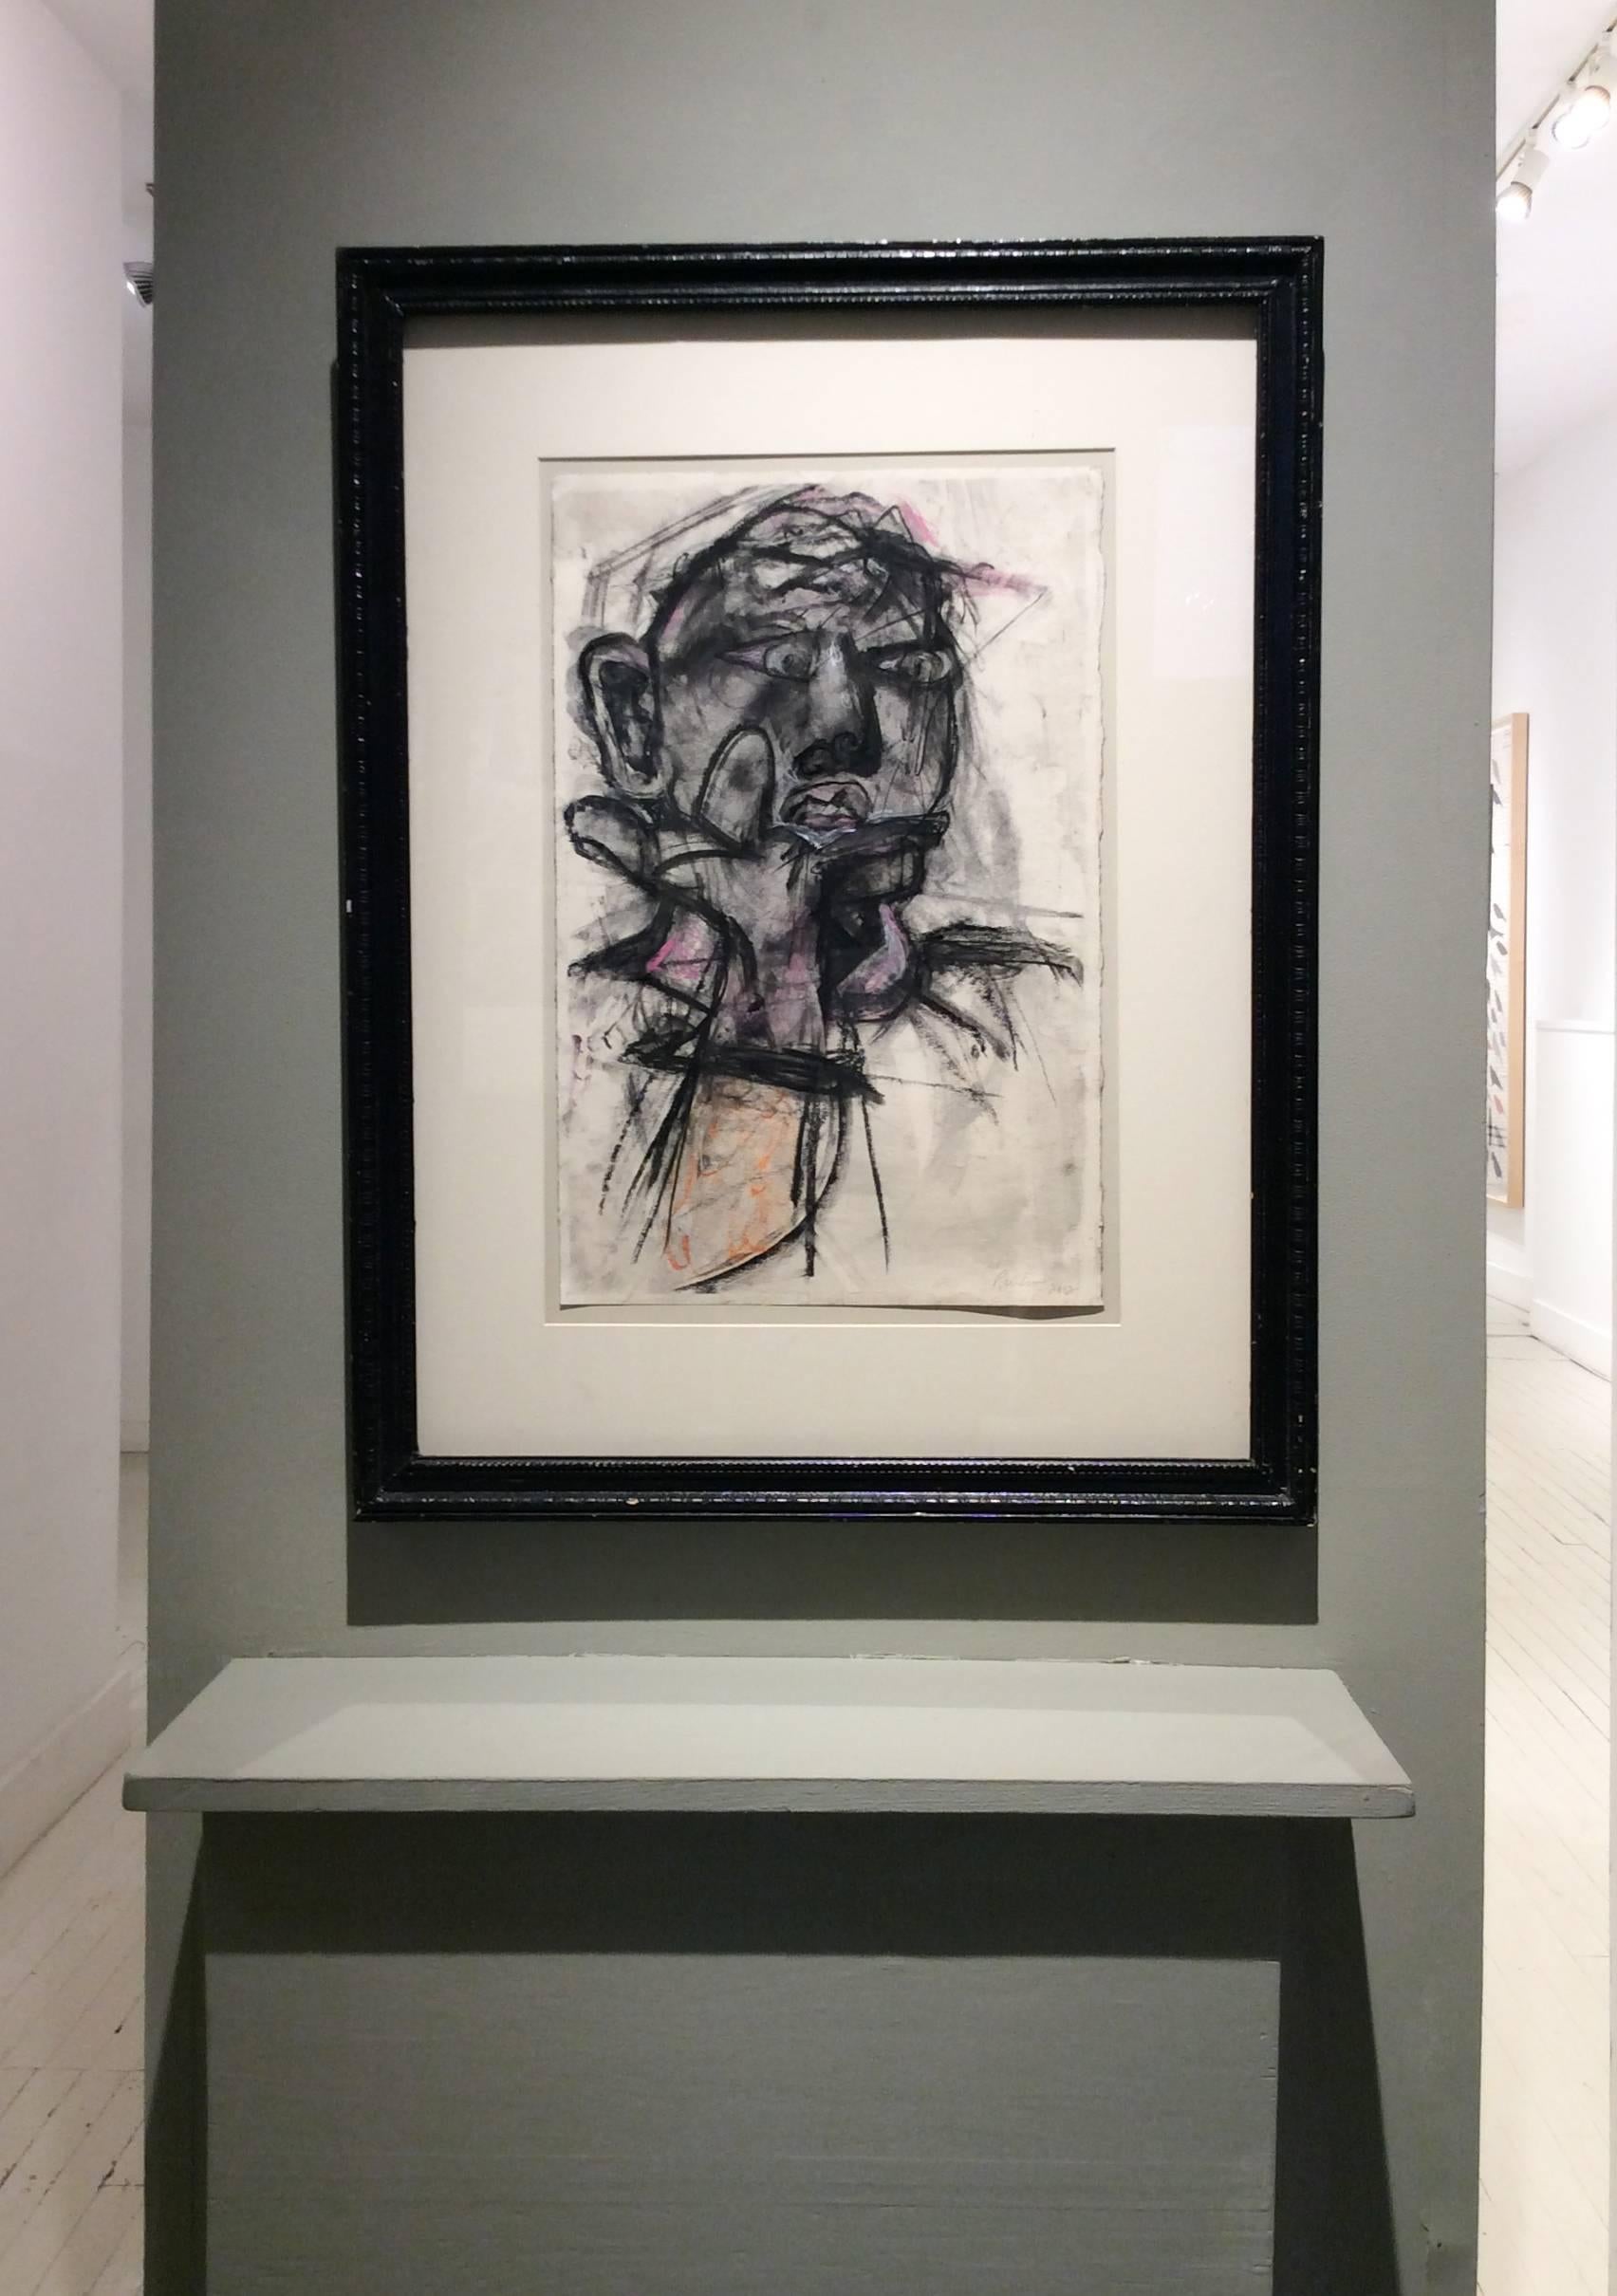 20 x 13 inches conti crayon on paper
31 x 24 x 2 inches framed, black molding, off white mat
signature in pencil in bottom right corner

This is a gray-scale portrait of a male drafted in a style that evokes surrealist automatism.  The artist's